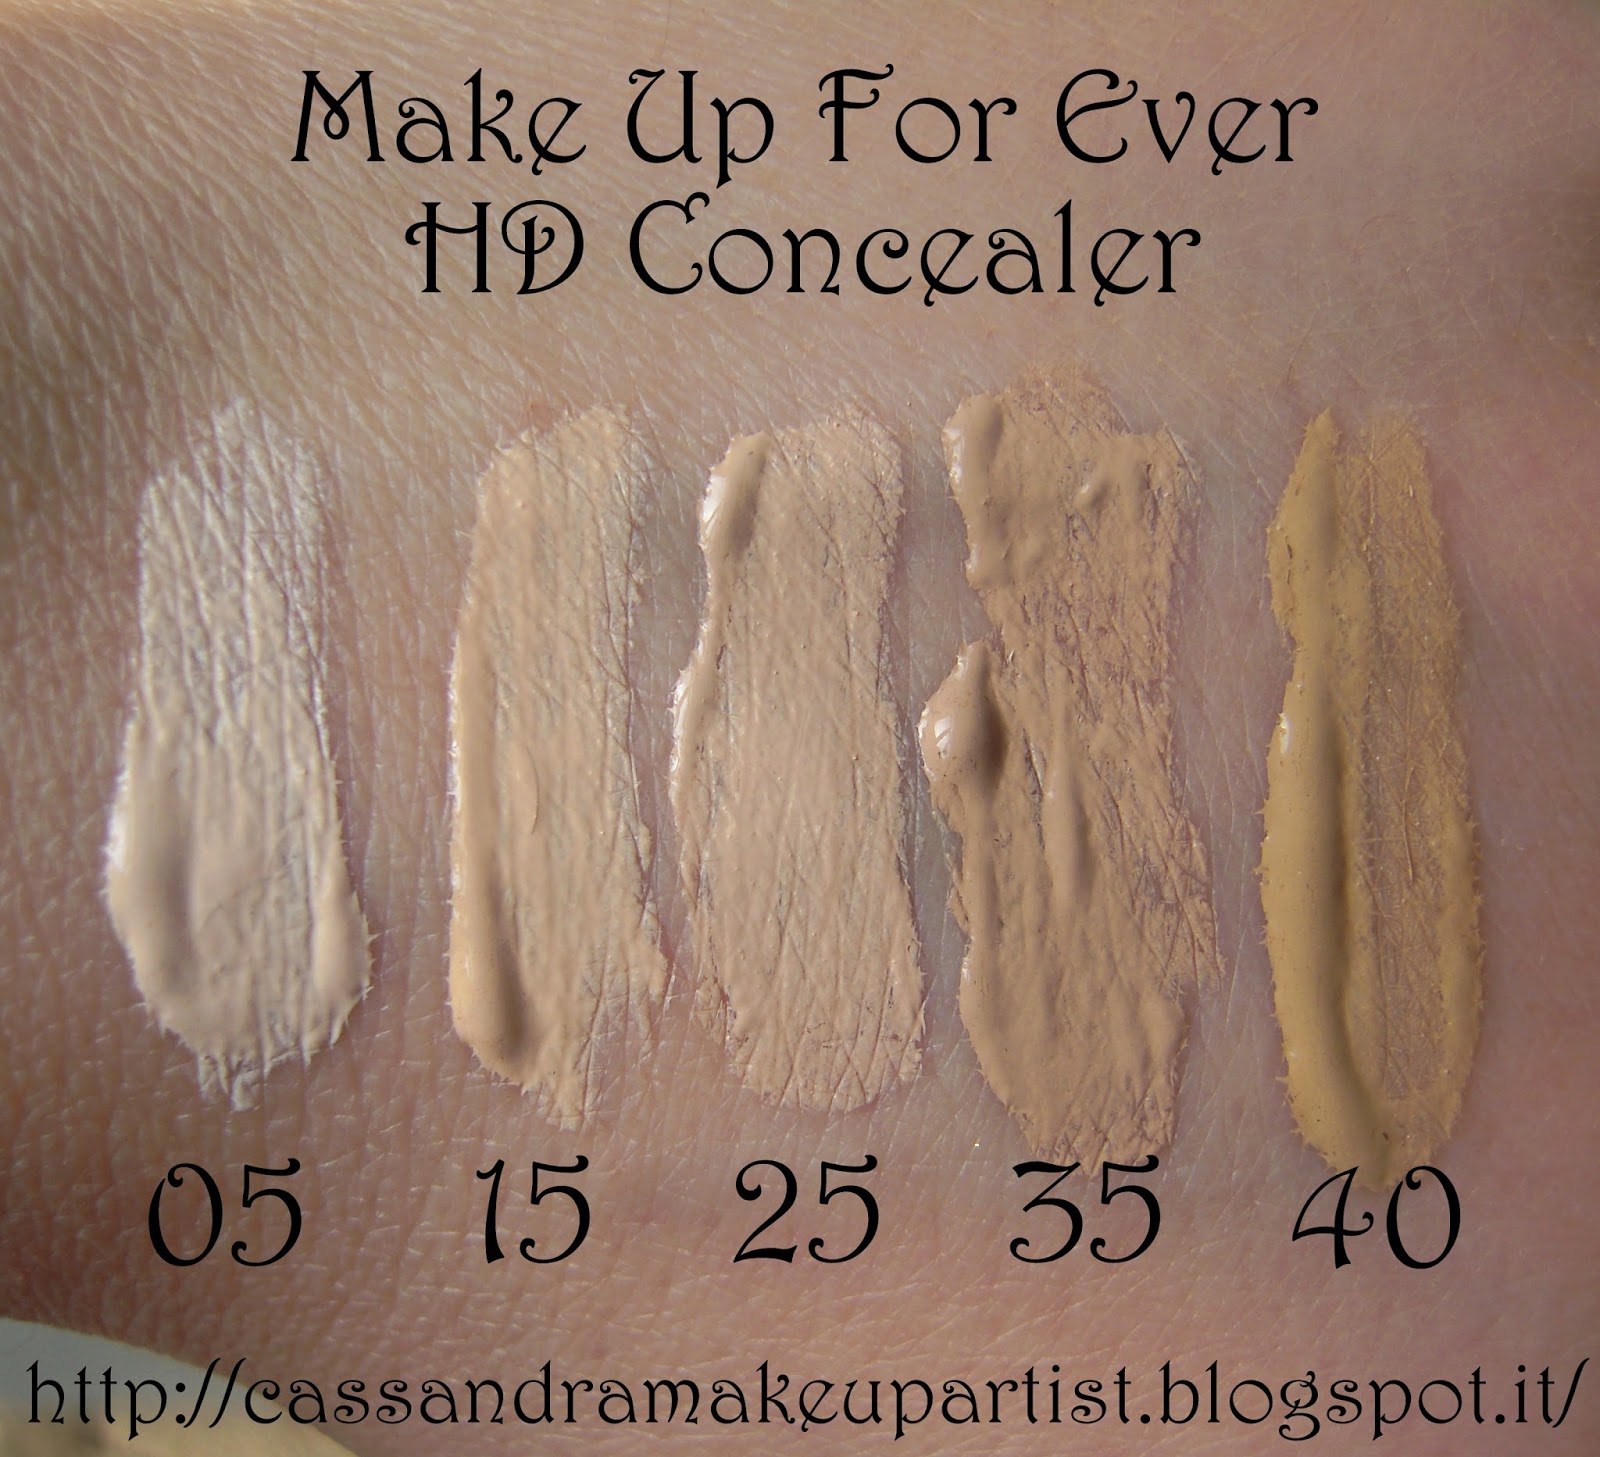 HD CONCEALER - MUFE - make up for ever - swatch - recensione - review - 05 - 15 - 25 - 35 - 40